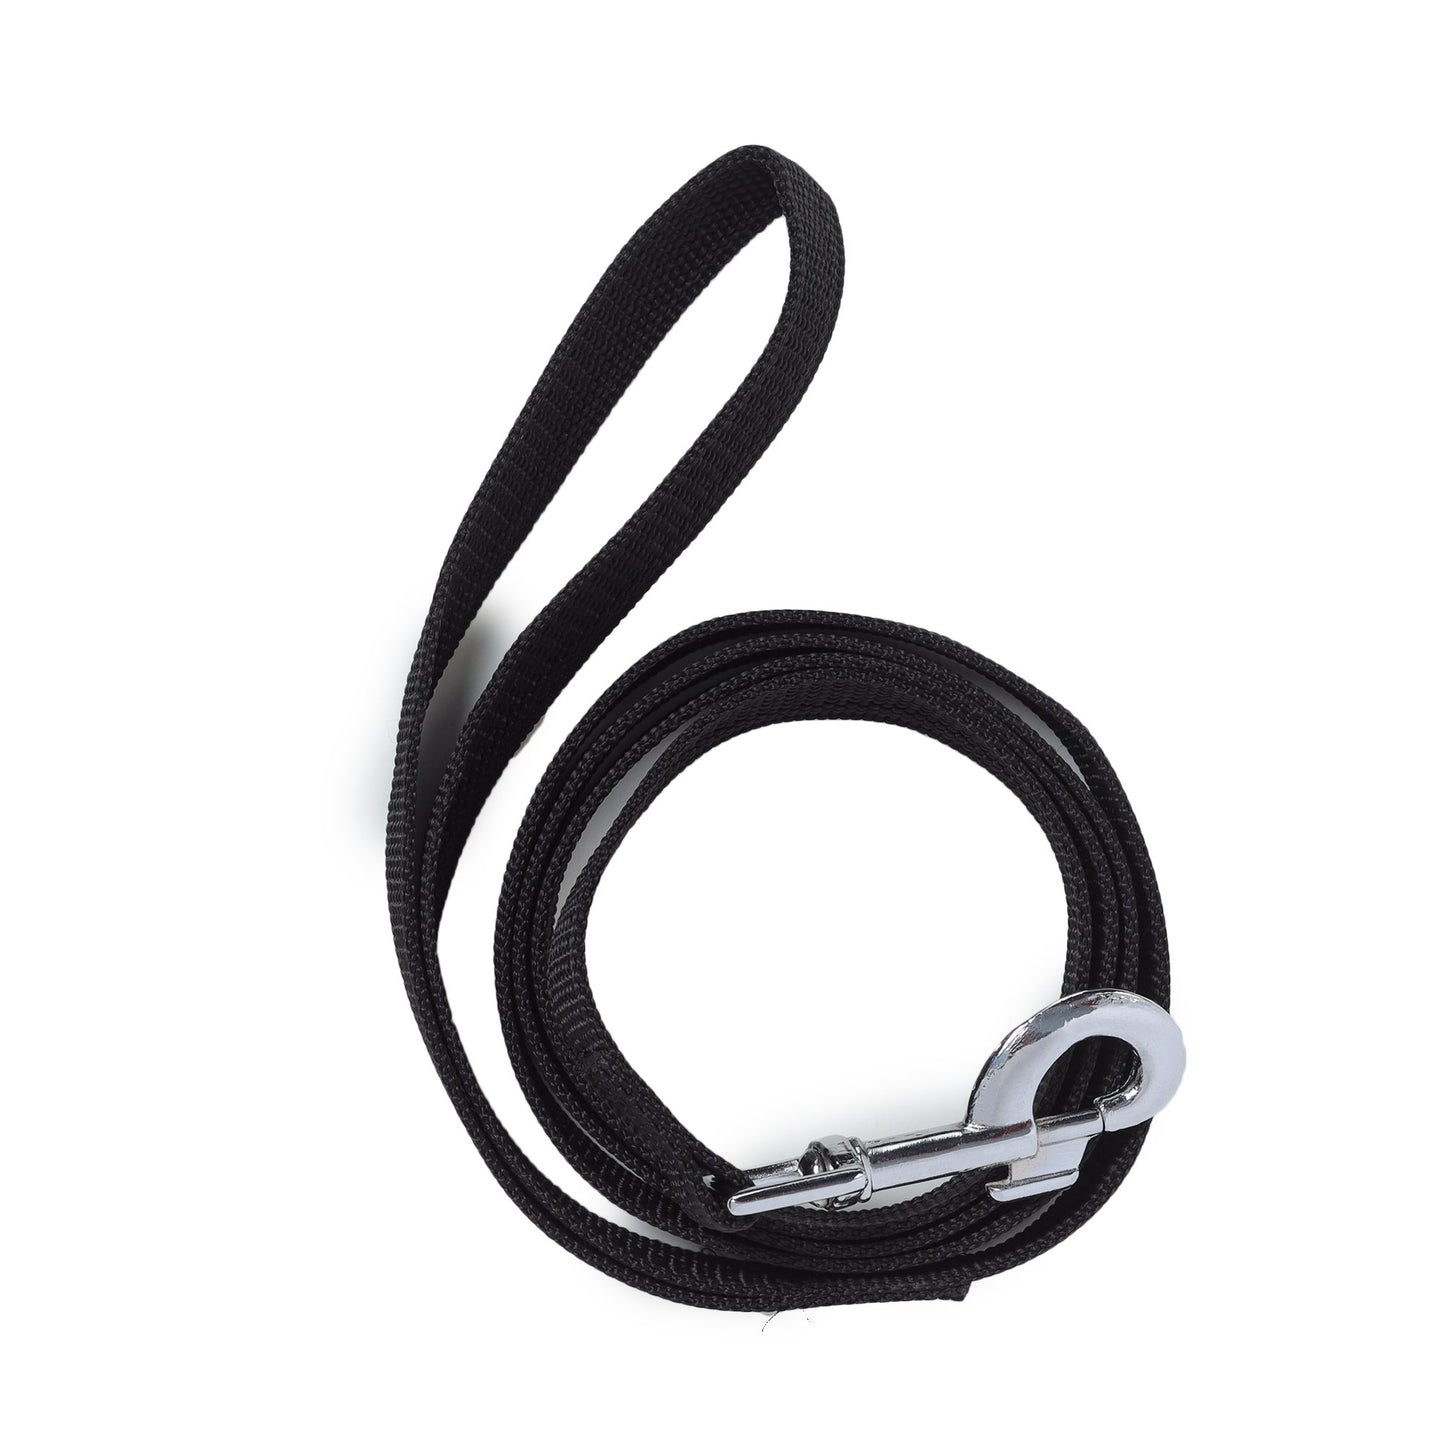 black coloured dog leash by Barks & Wags